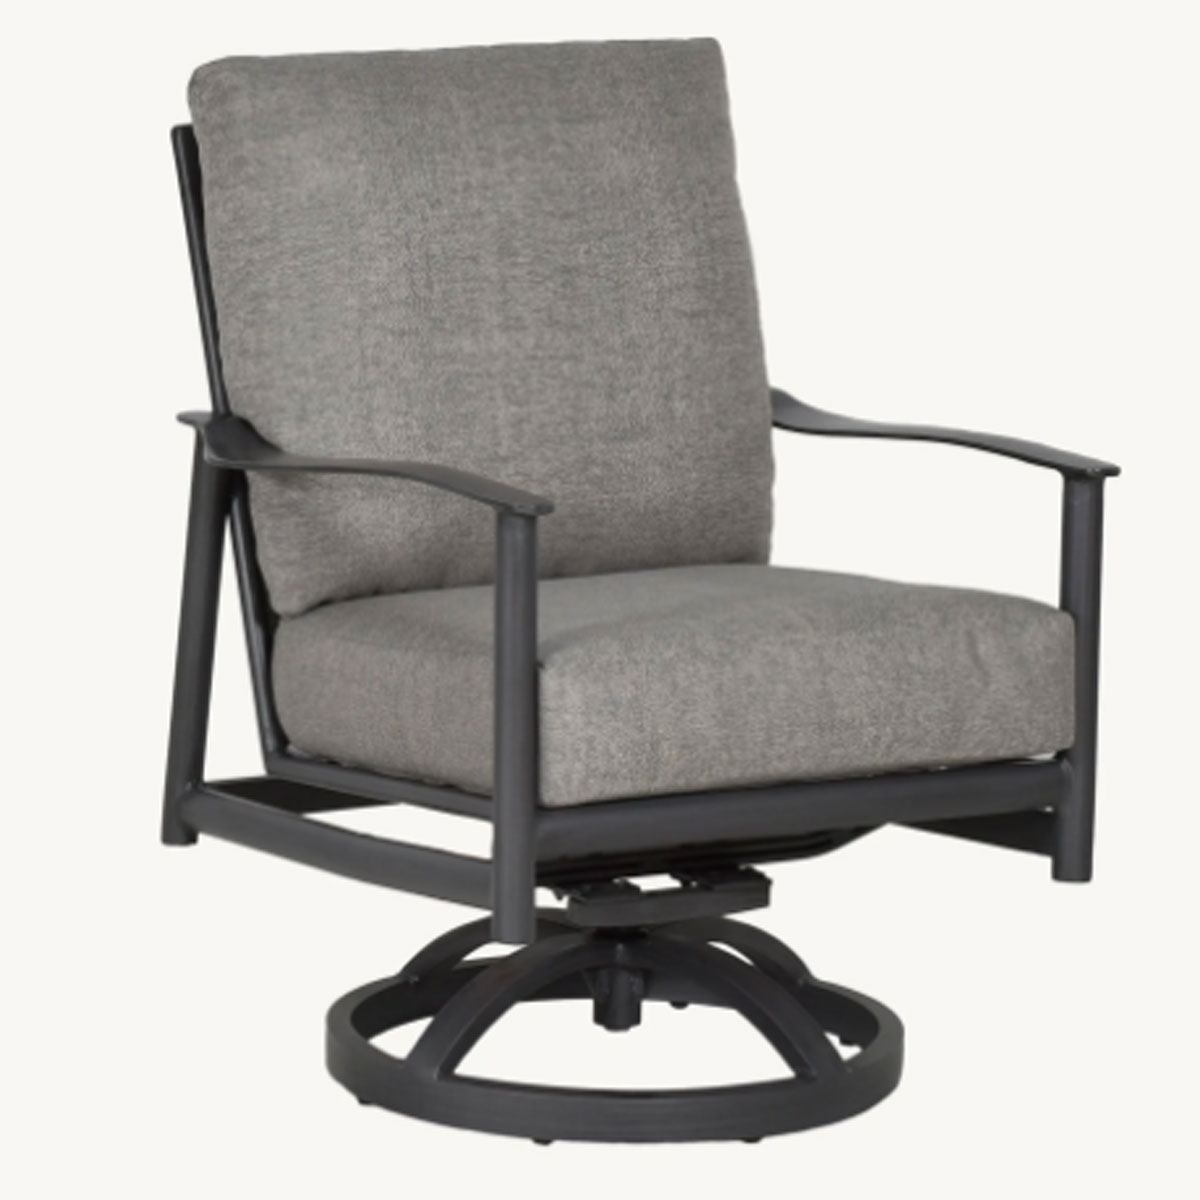 Castelle Barbados Cushion Dining Swivel Chair